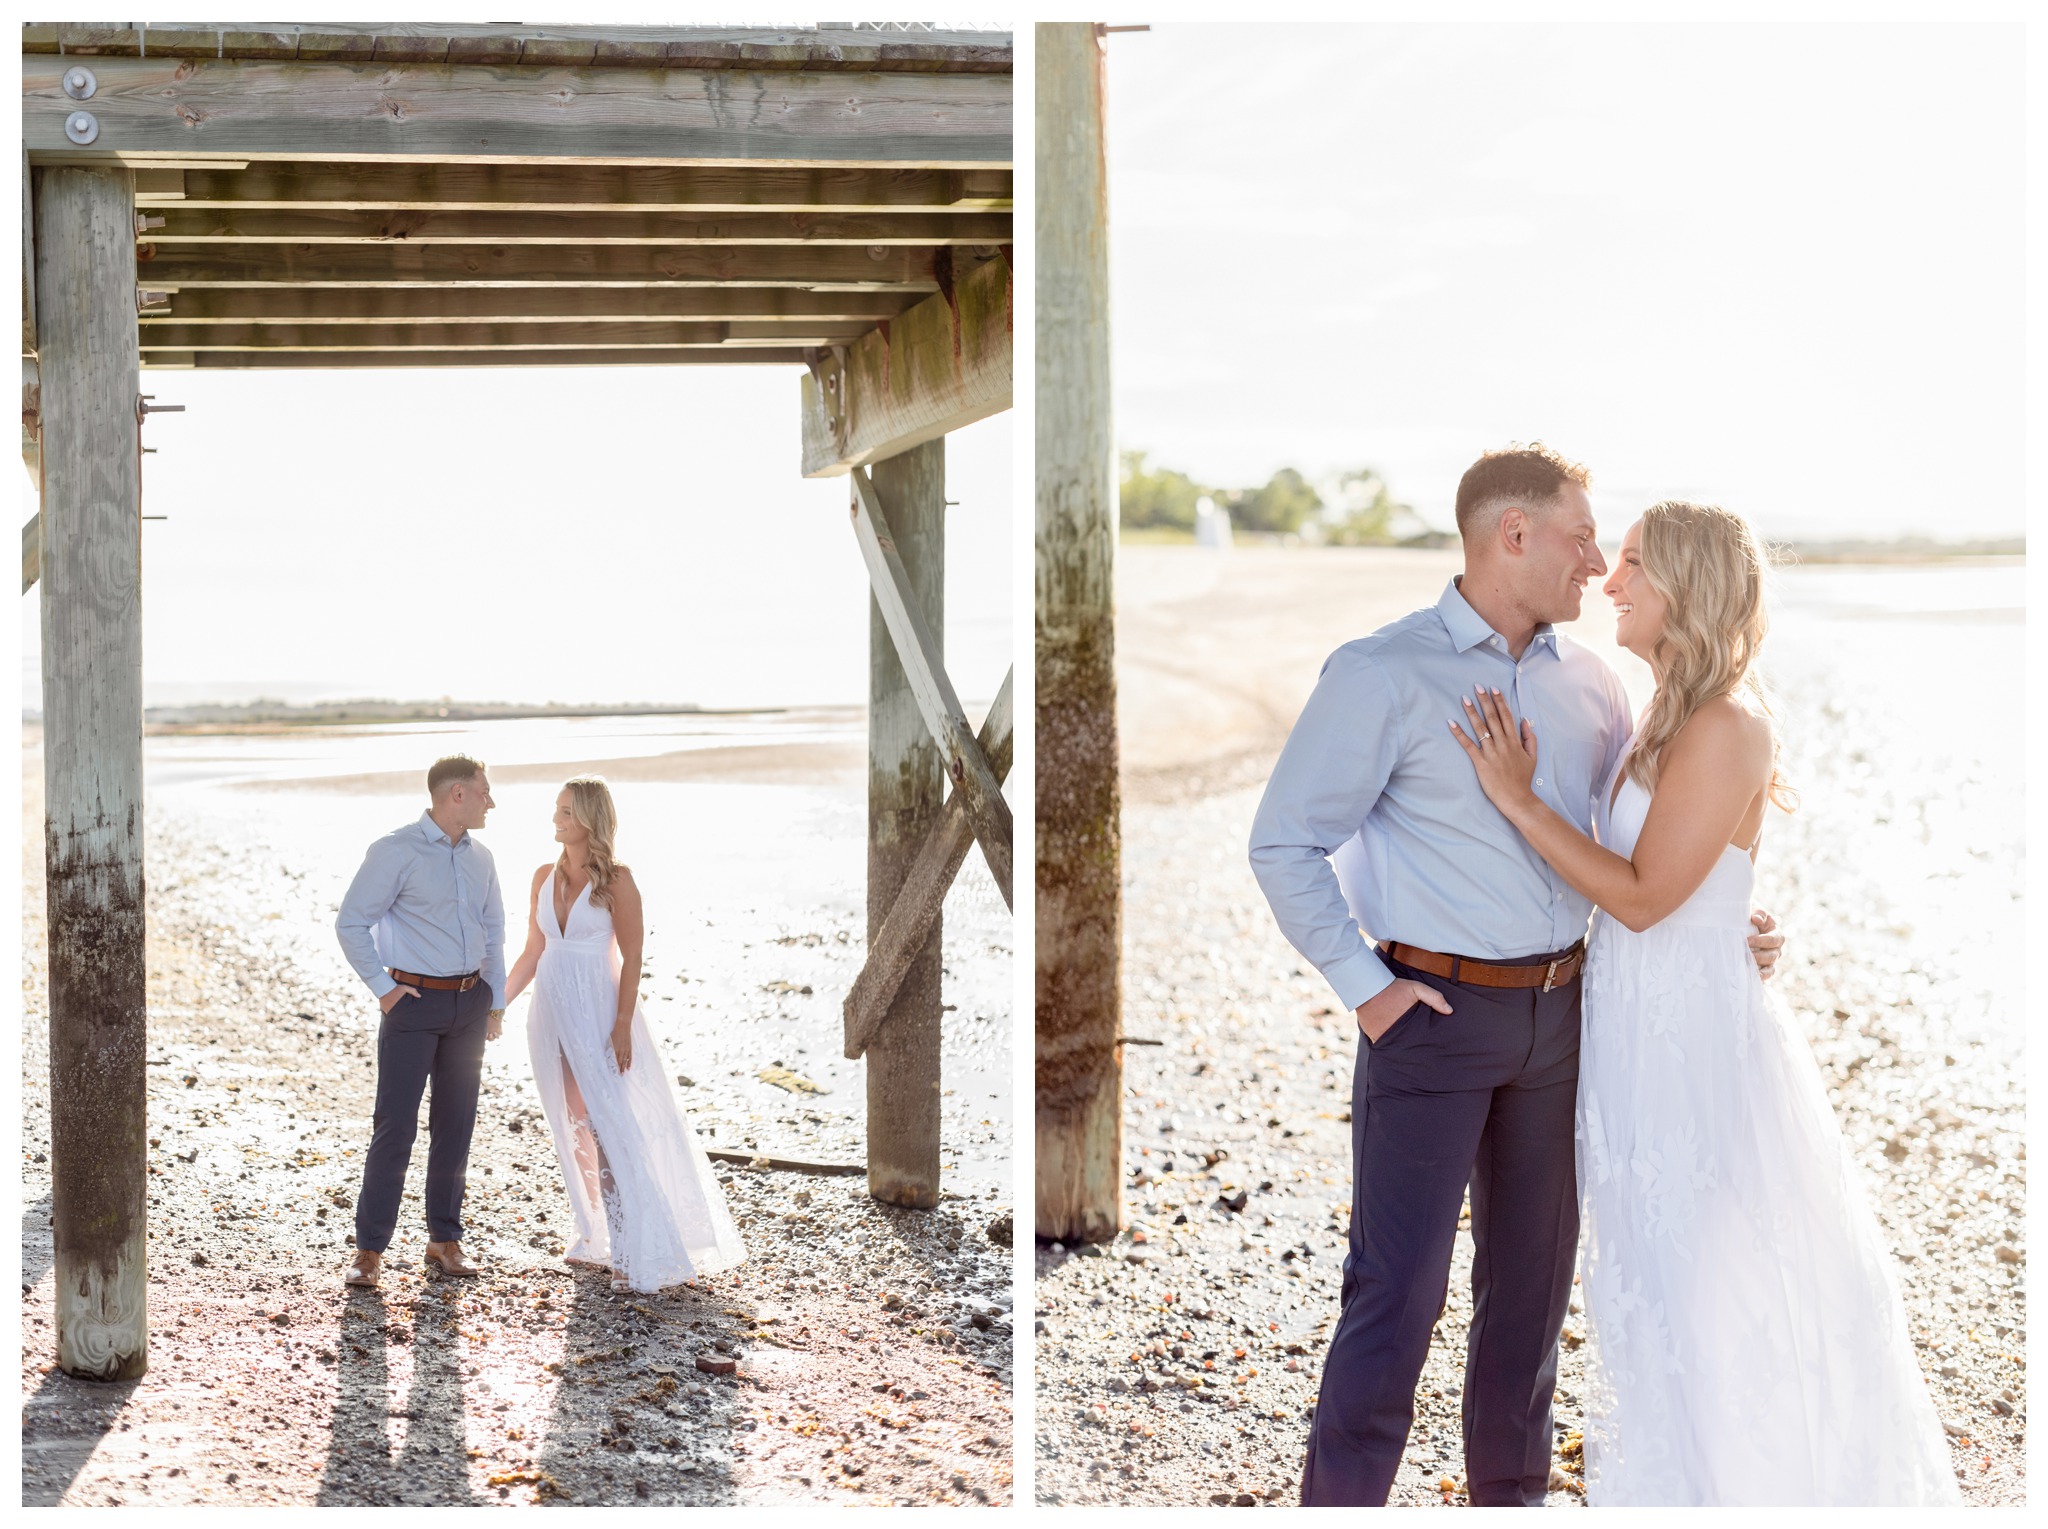 walnut beach engagement session in milford ct at silver sands beach under the pier